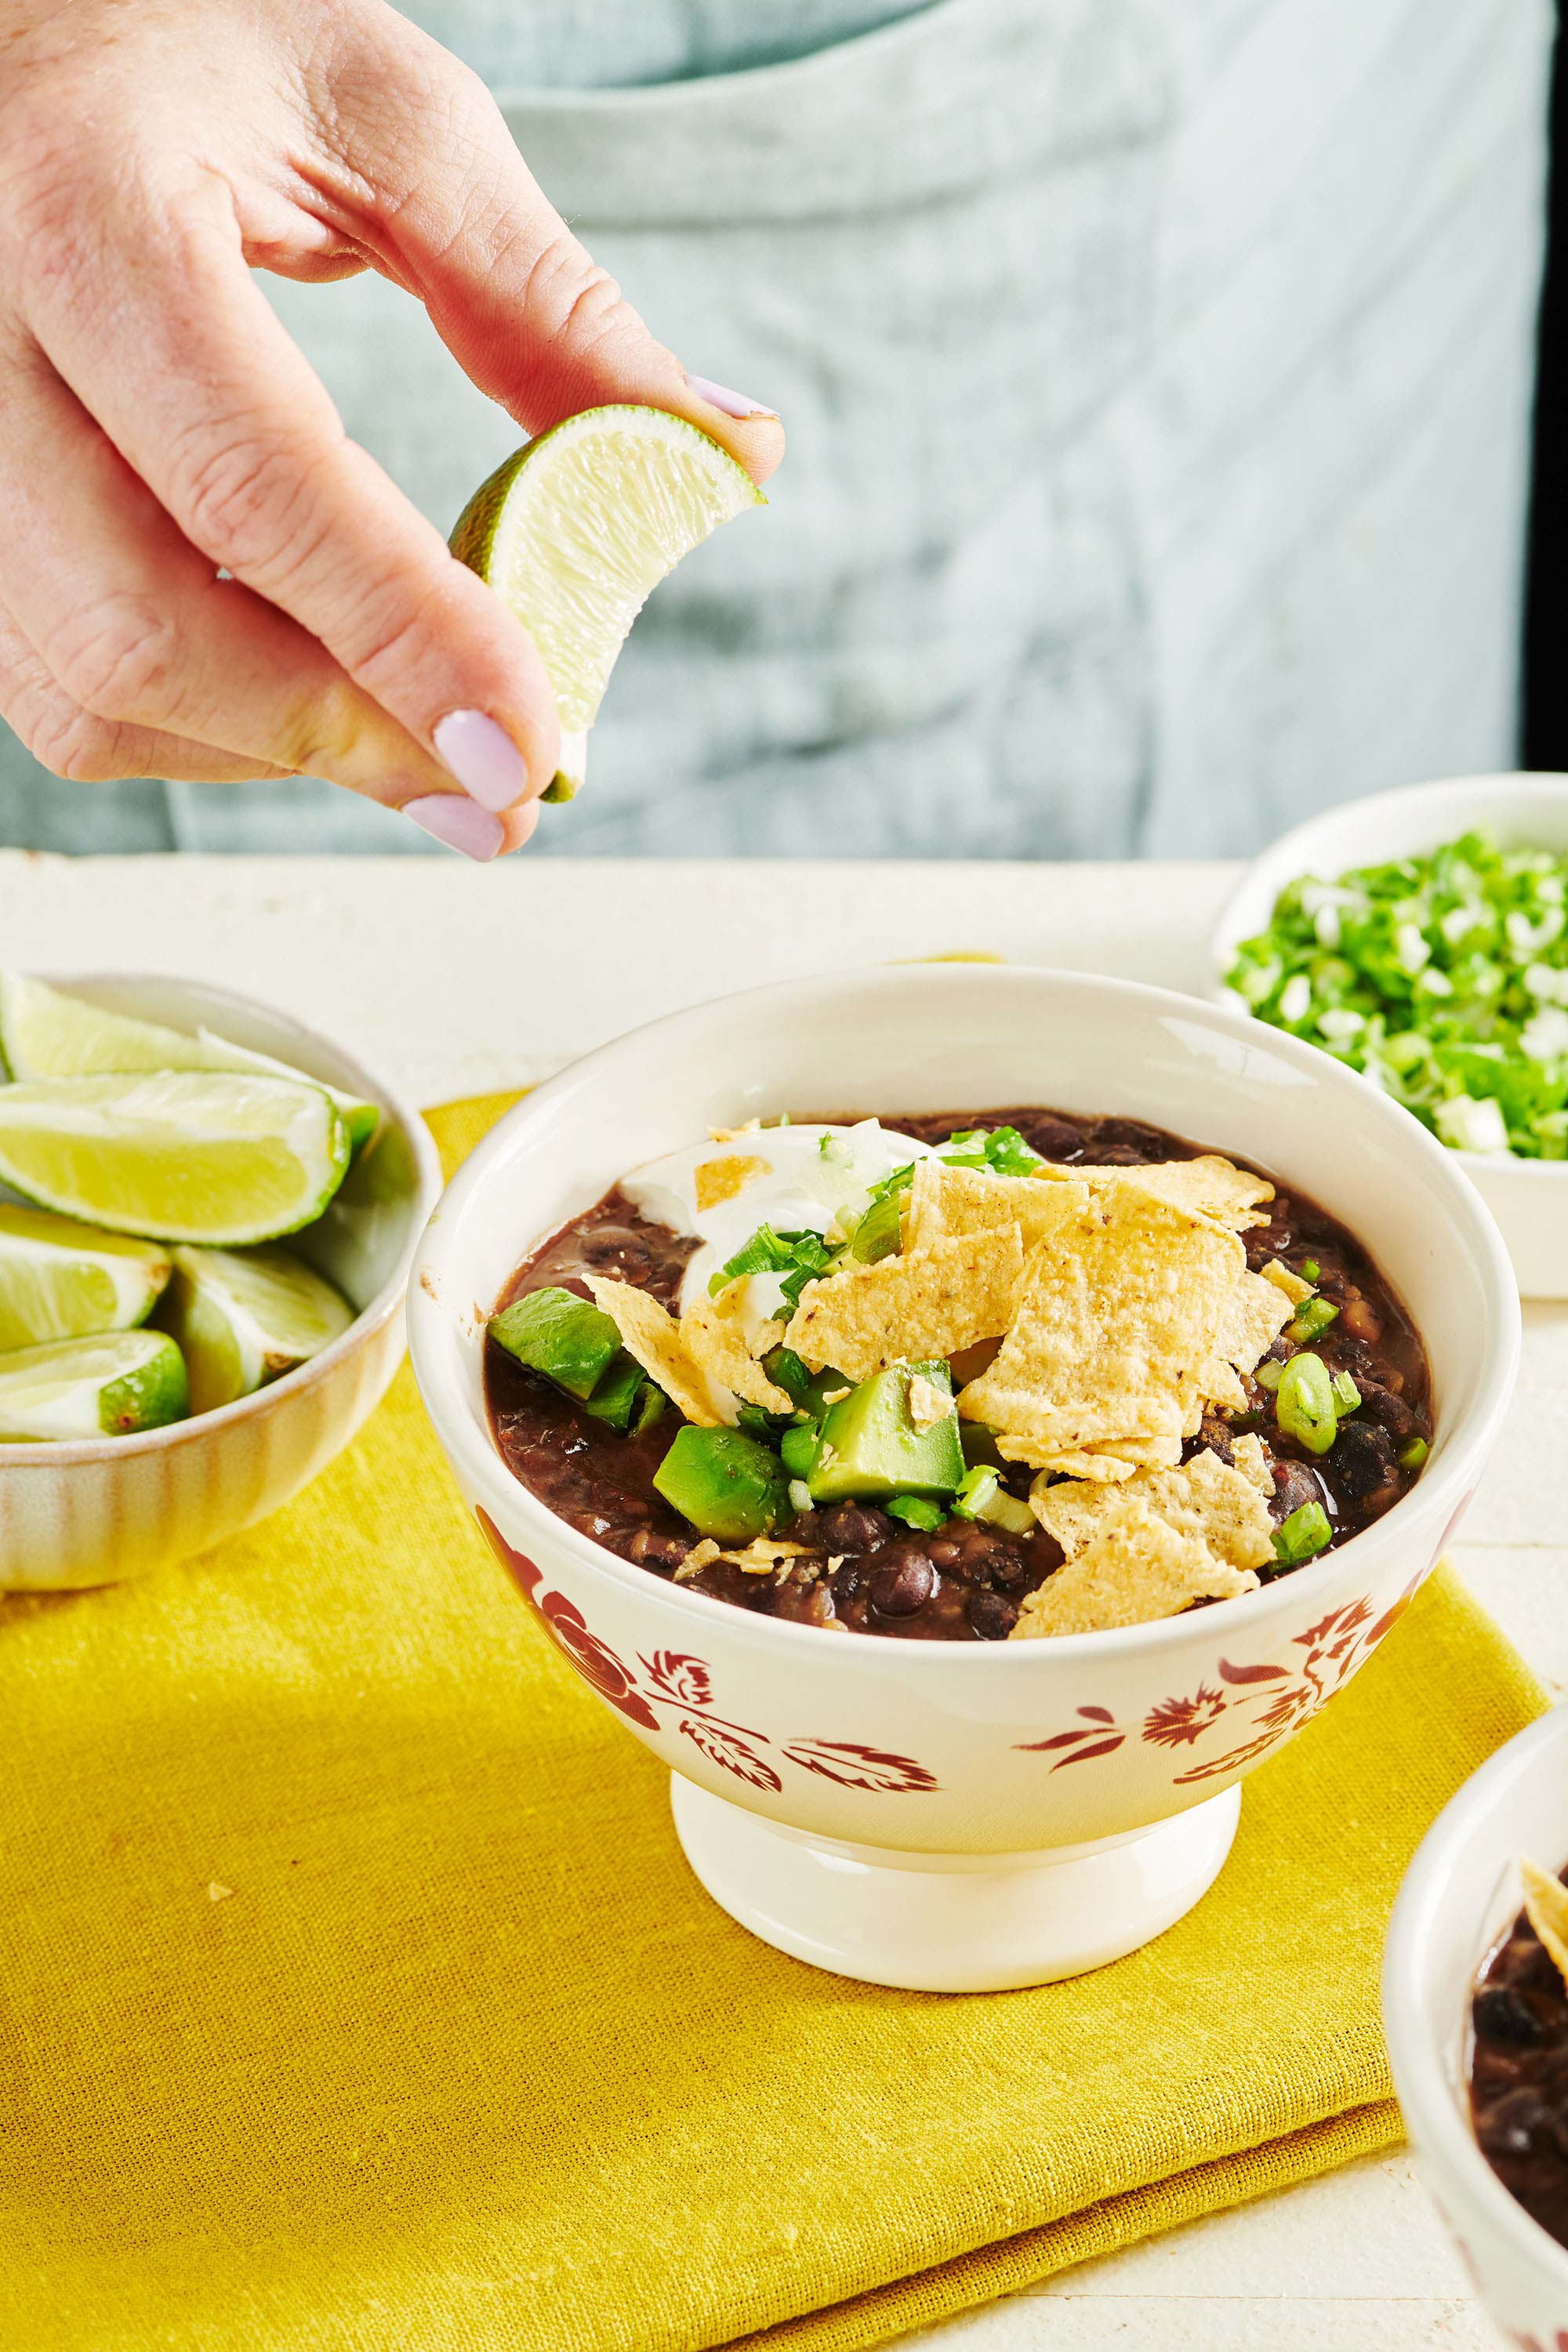 Woman squeezing a lime slice onto a bowl of Vegetarian Black Bean Soup.